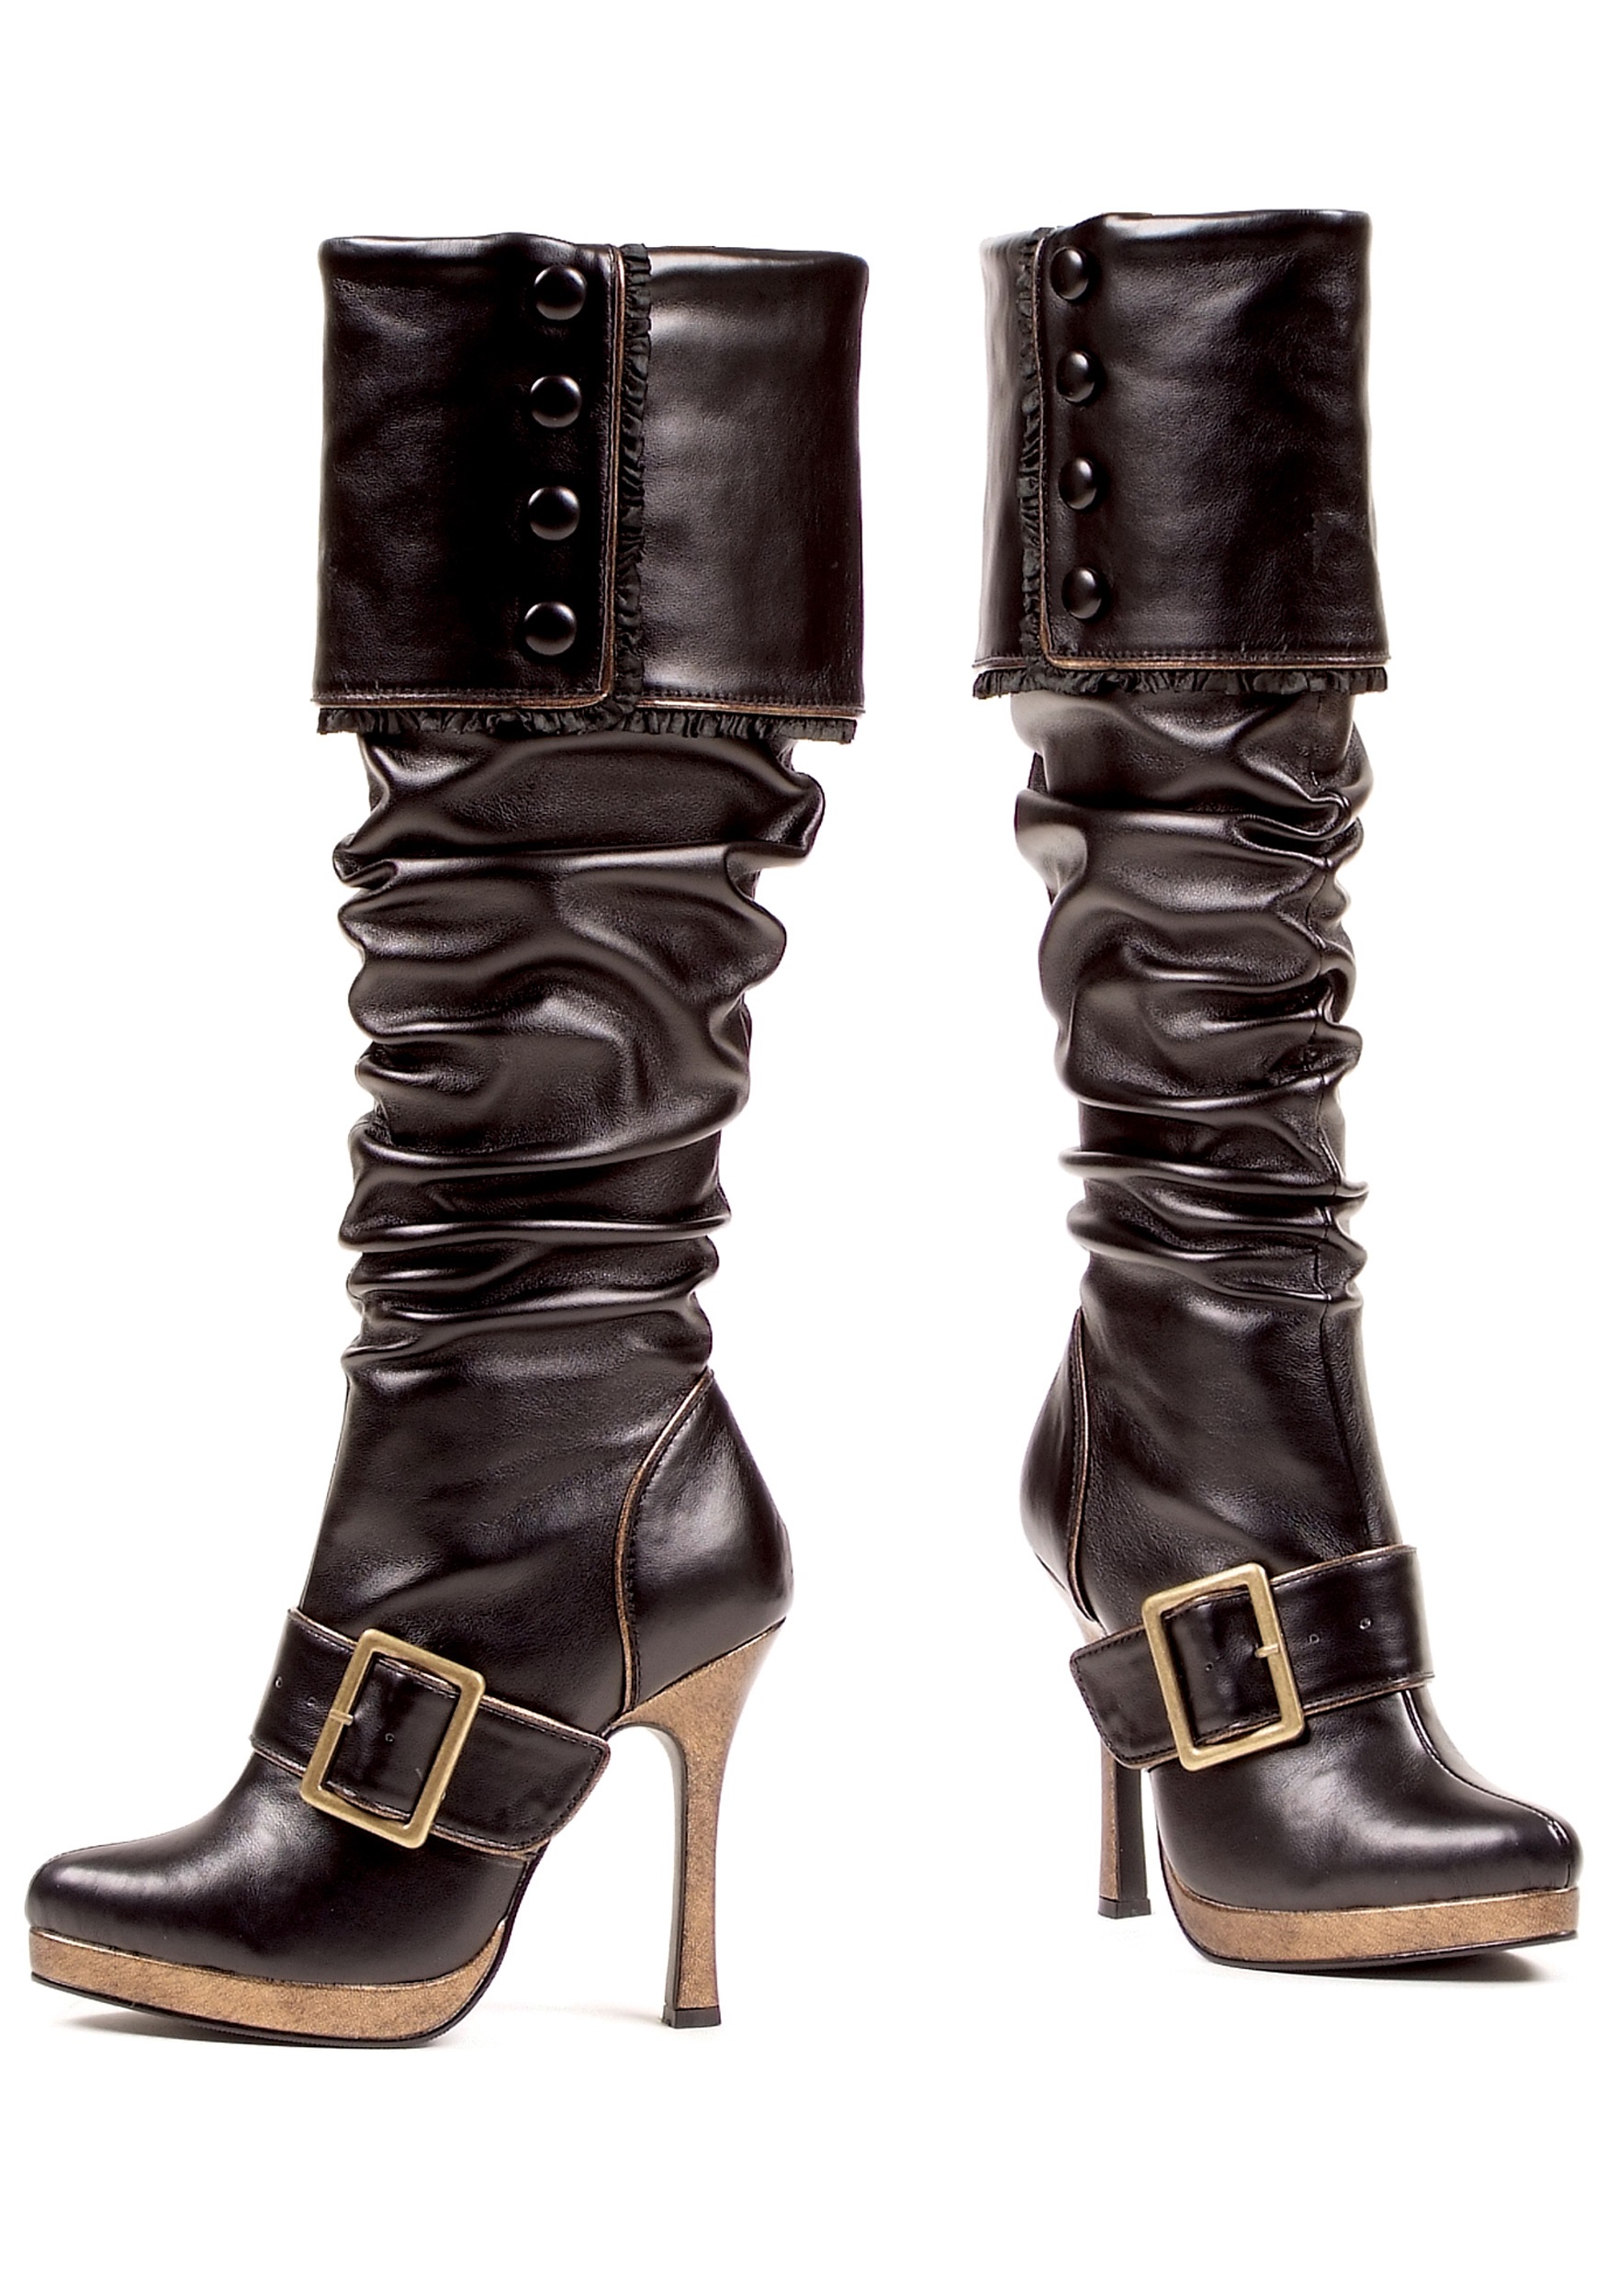 Image of Women's Sexy Buckle Pirate Boots ID EE426GRACE-10